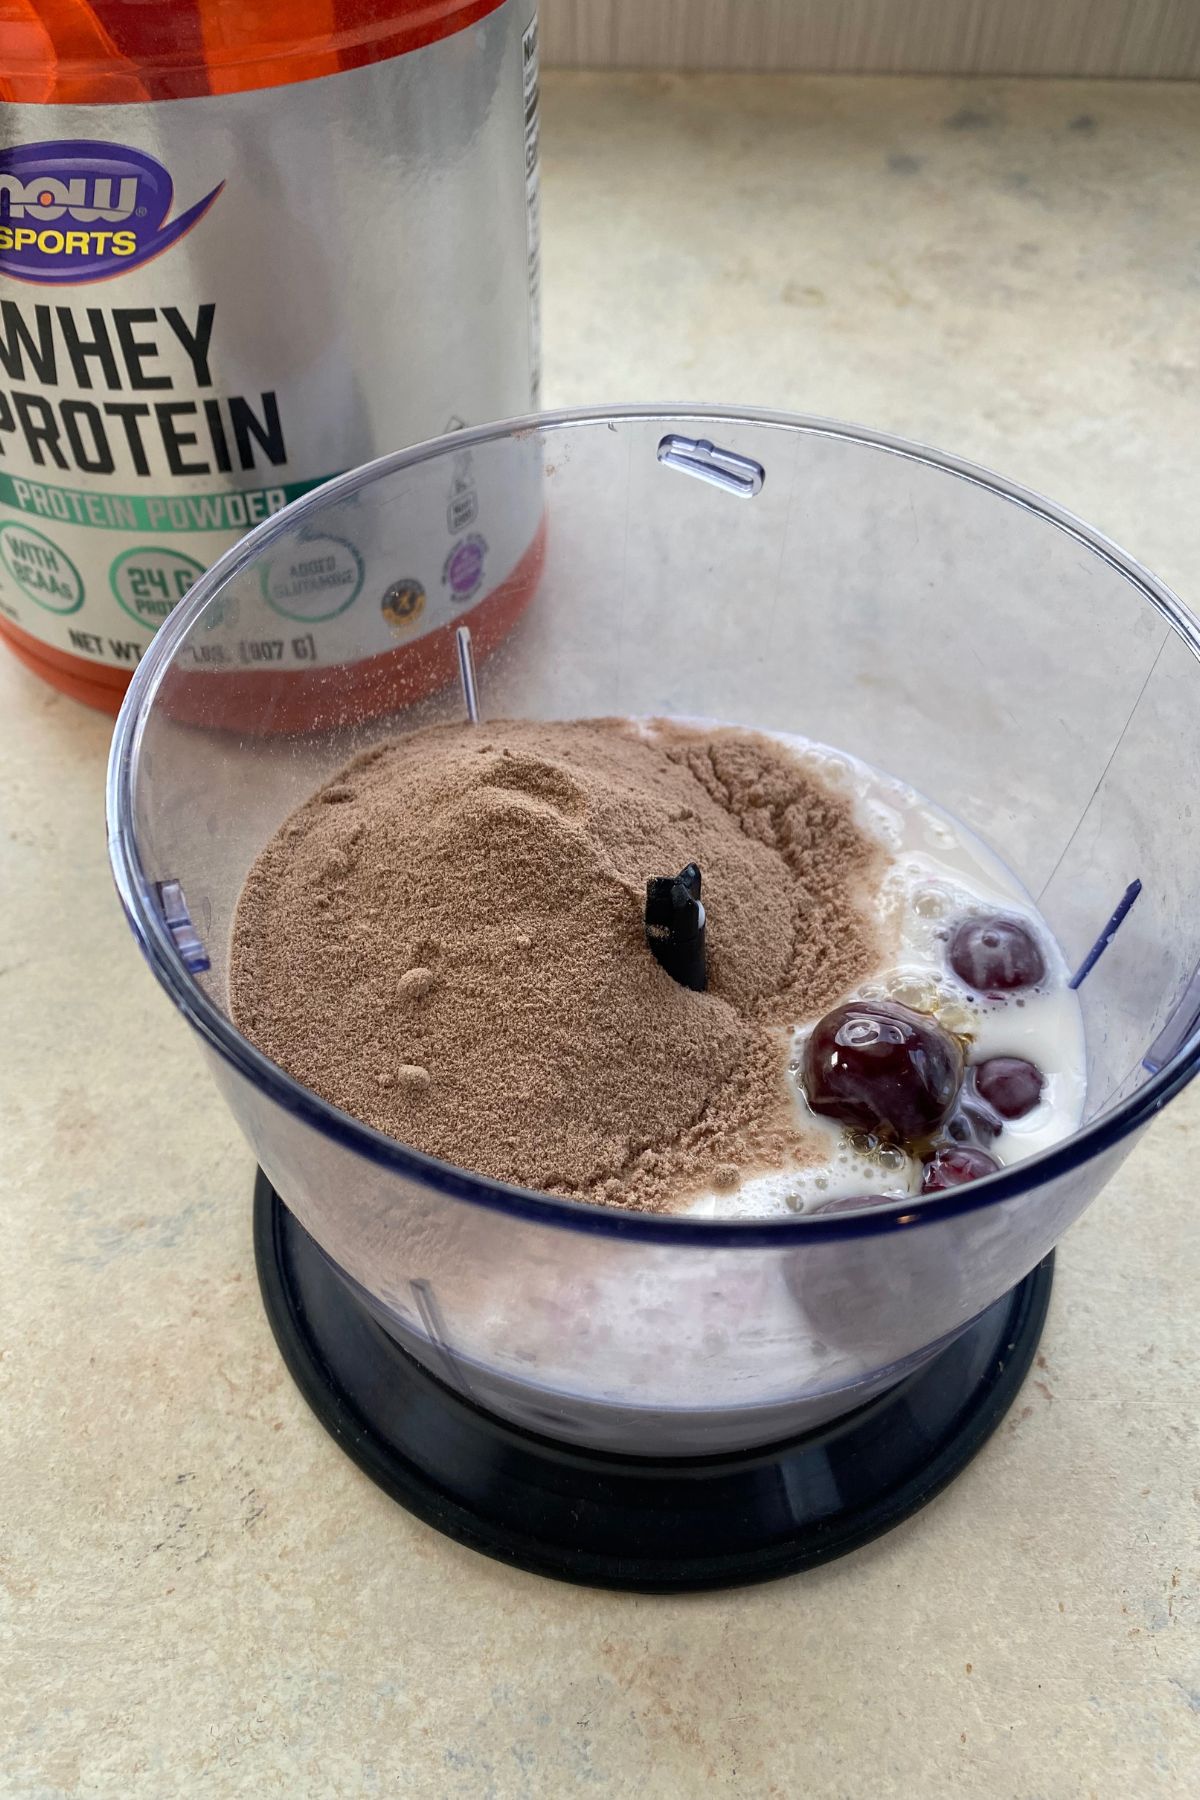 A bowl of chocolate whey protein next to a bowl of cherries.